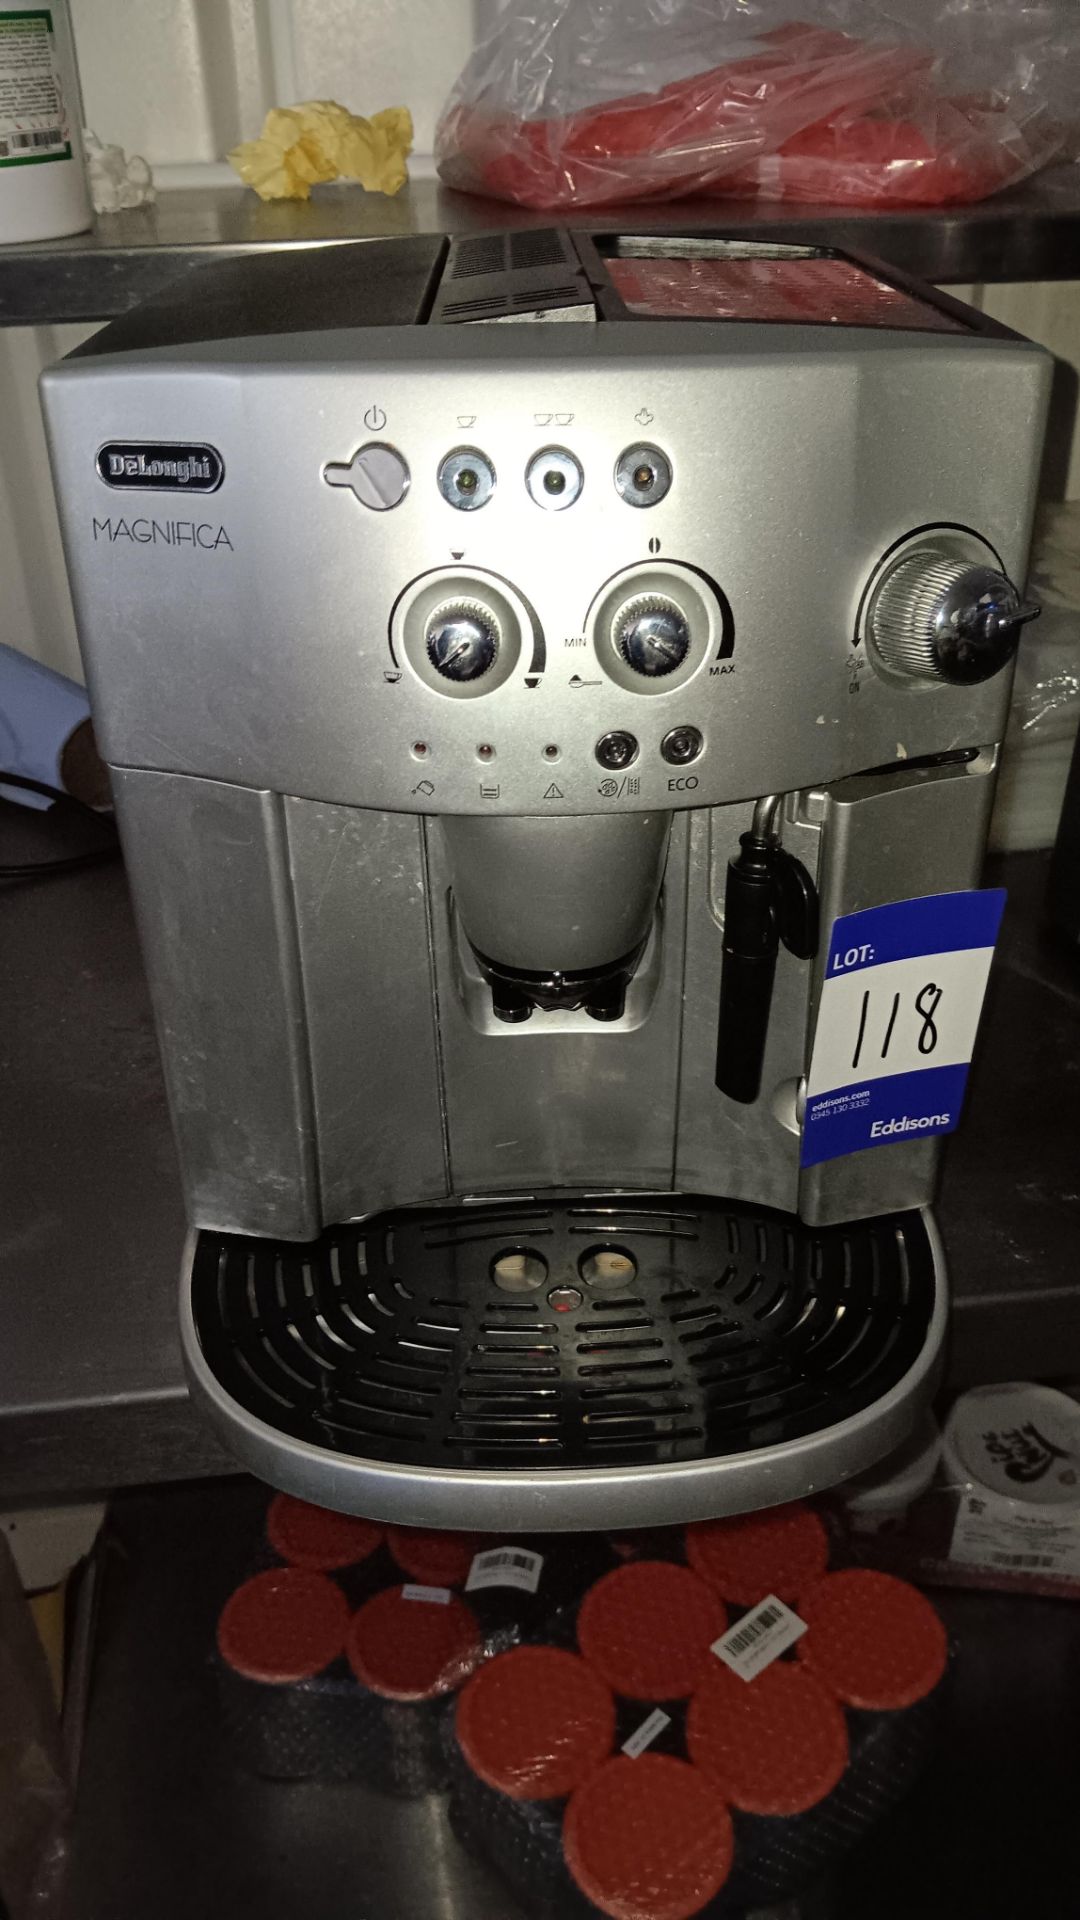 De’Longhi Magnifica ESAM4200.S.EX:1 Automatic bean to cup coffee machine, Serial number 11729